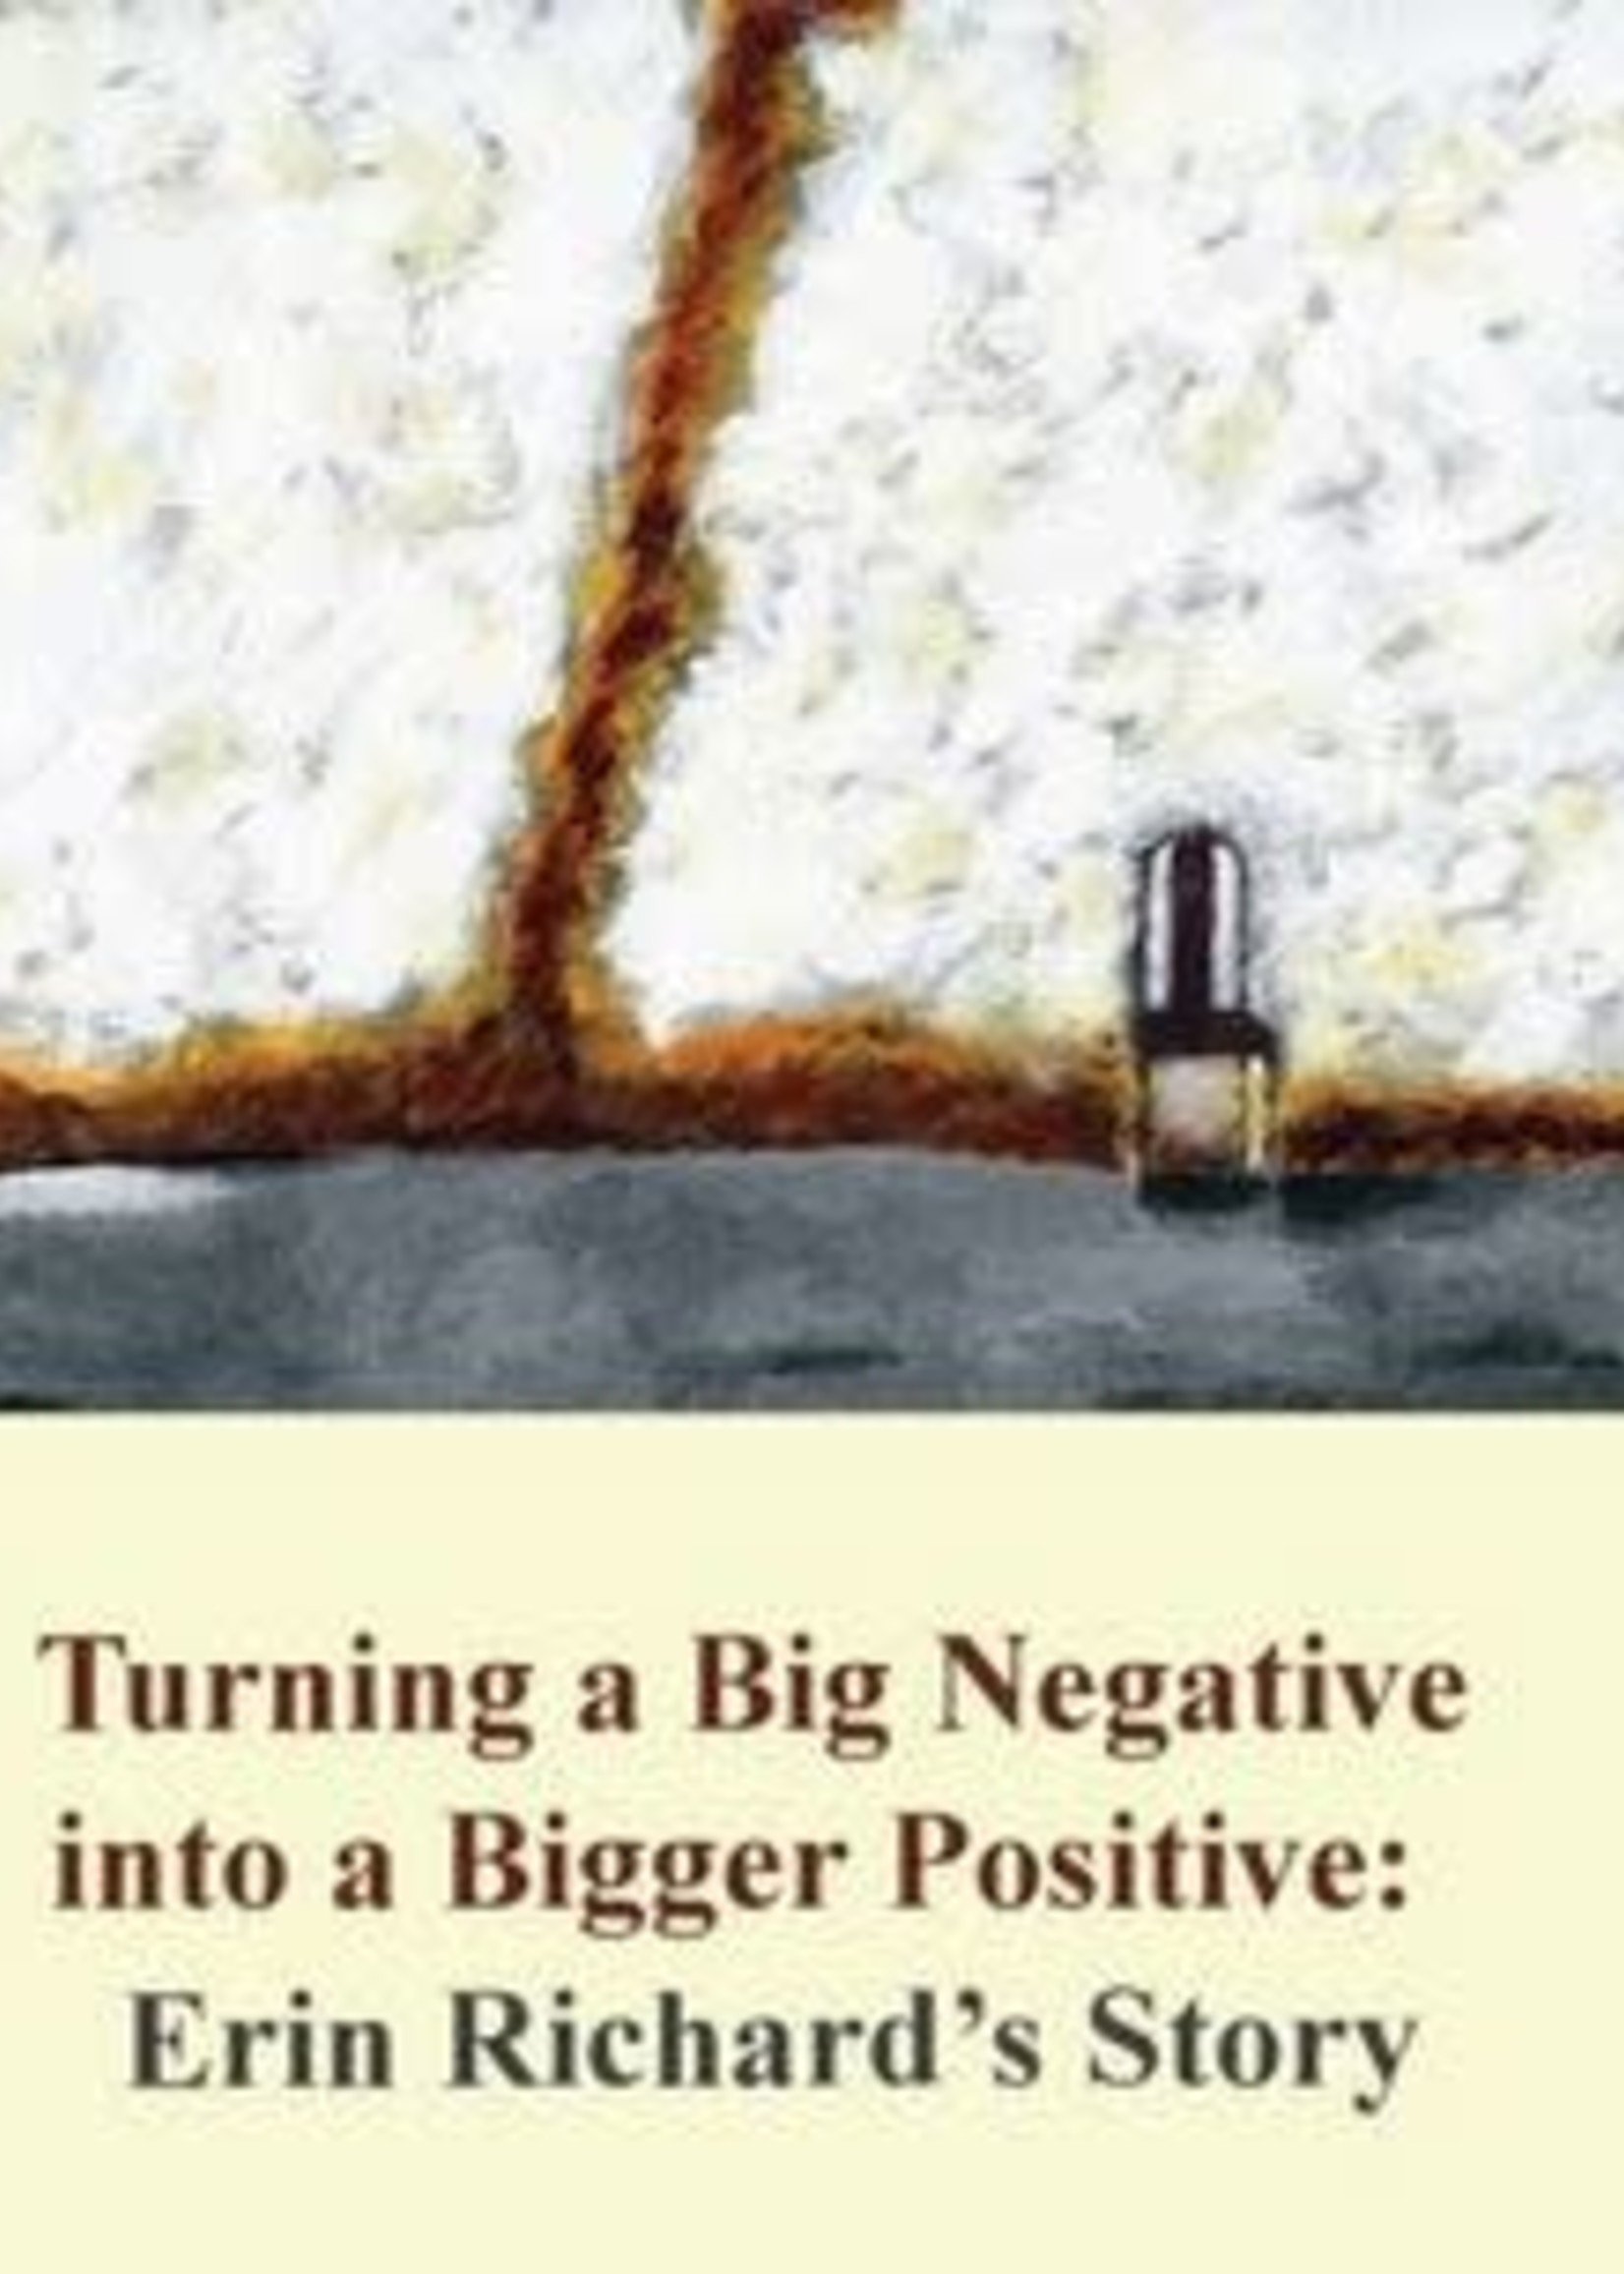 Turning a big Negative Into a Bigger Positive: Erin Richard's Story by Erin Richard